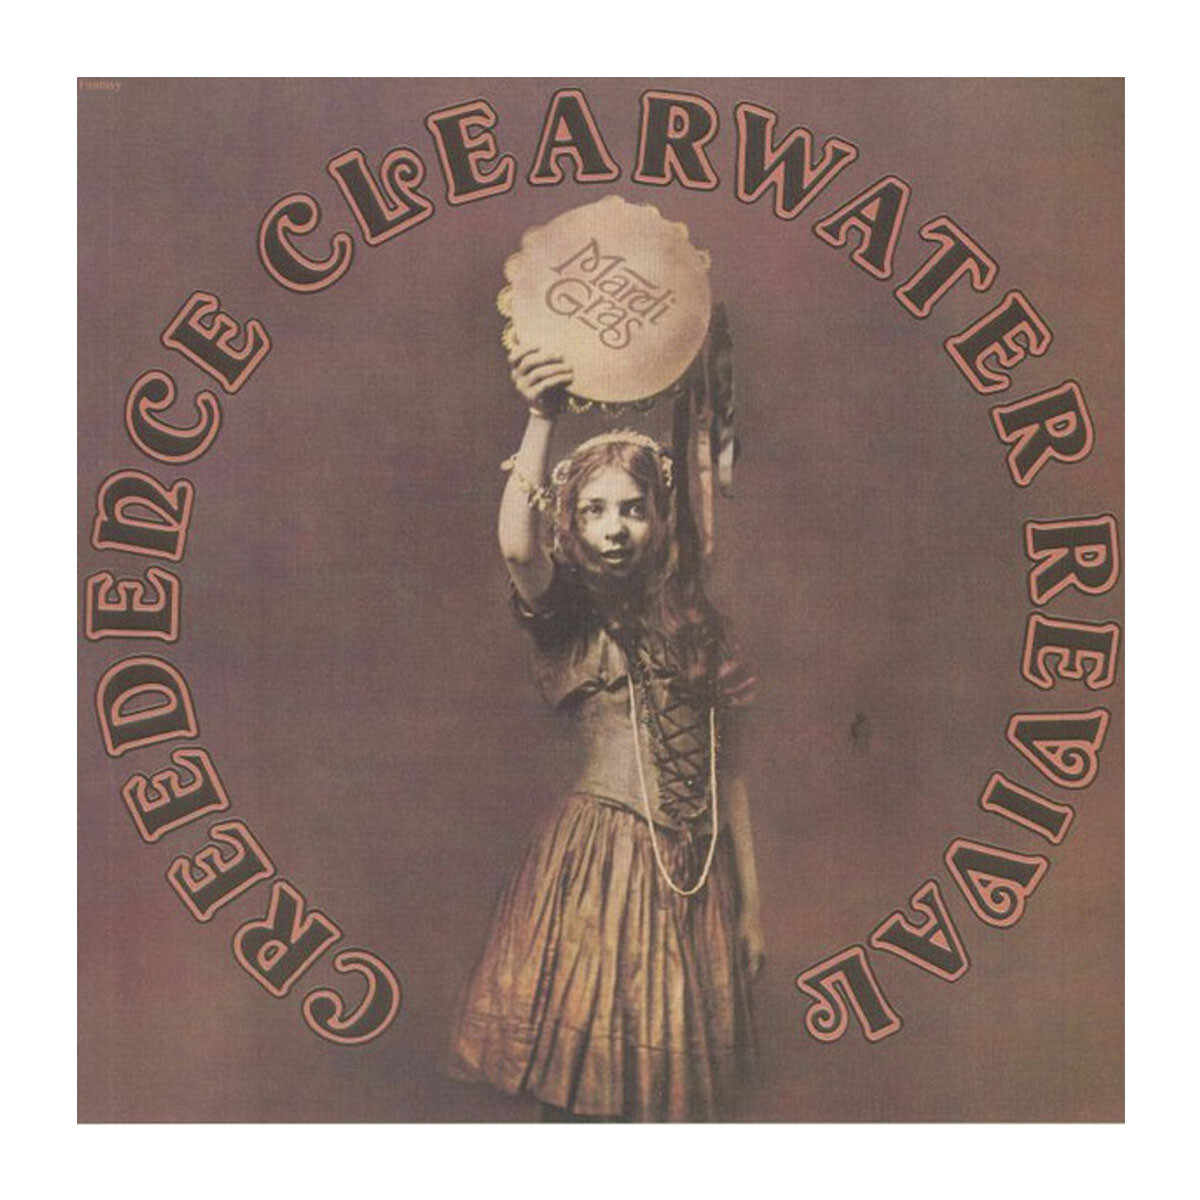 Creedence Clearwater Revival-mardi Gras 